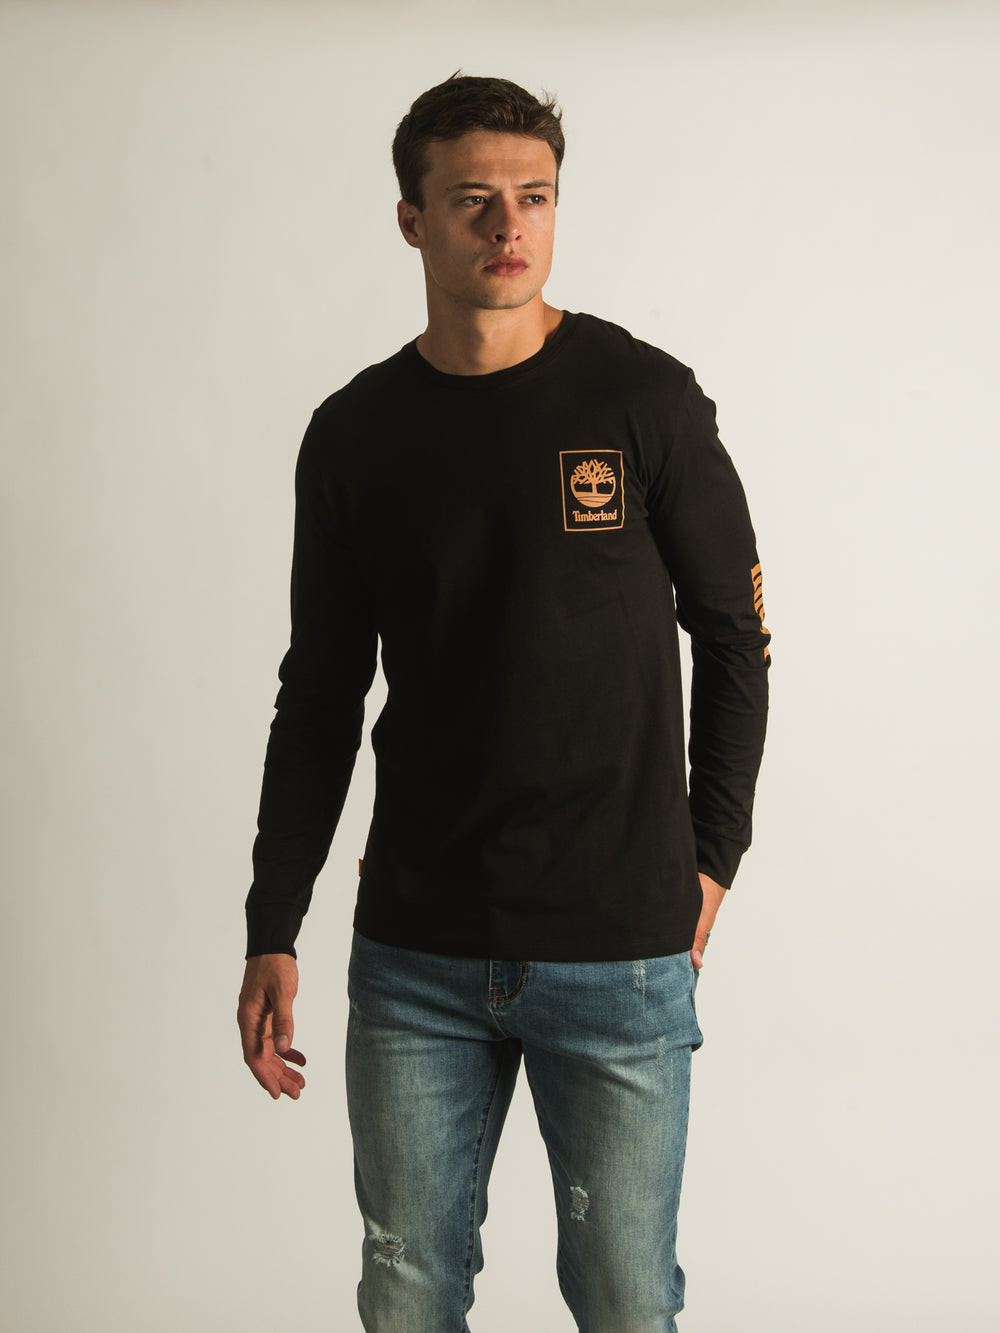 T-SHIRT LOGO À MANCHES LONGUES TIMBERLAND CHEST STACK